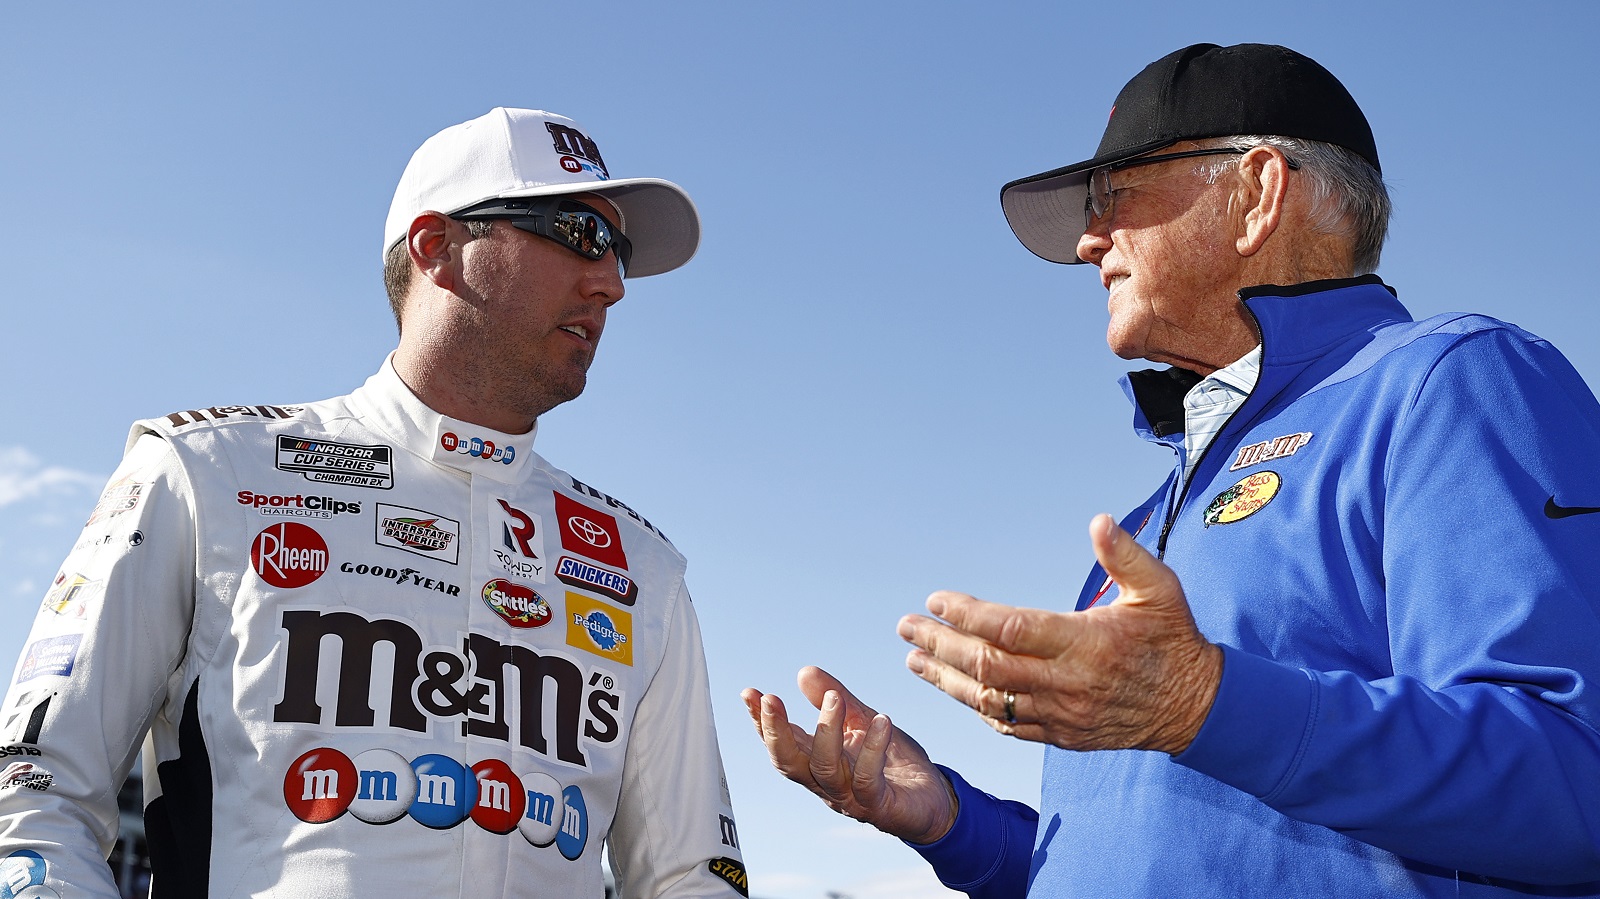 Kyle Busch, driver of the No. 18 Toyota, and Hall of Famer and team owner Joe Gibbs talk on the grid prior to the NASCAR Cup Series Coca-Cola 600 at Charlotte Motor Speedway on May 30, 2021.